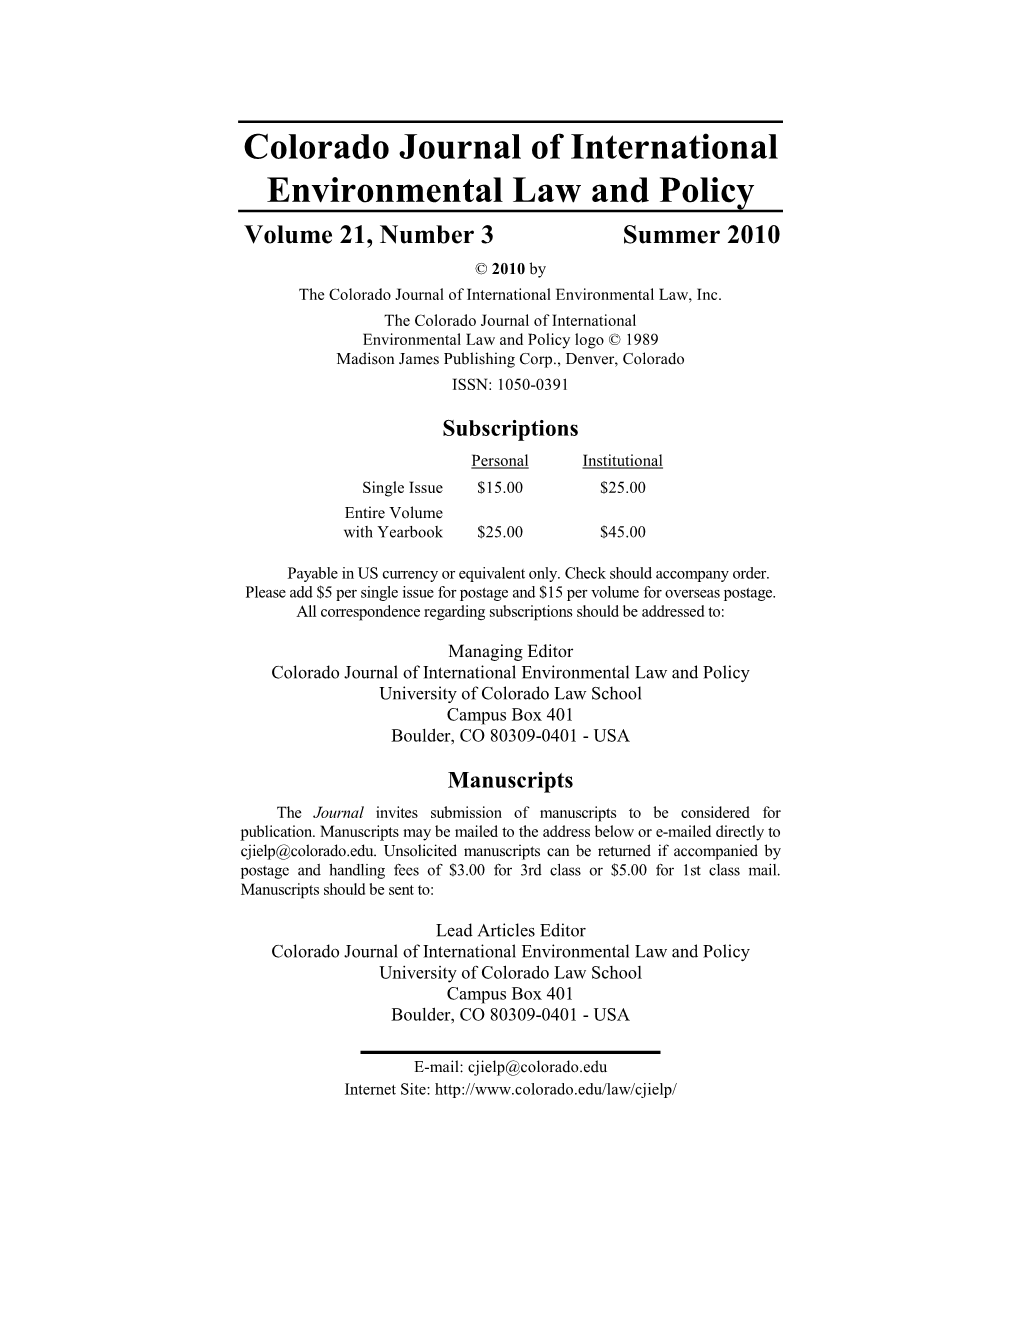 Colorado Journal of International Environmental Law and Policy Volume 21, Number 3 Summer 2010 © 2010 by the Colorado Journal of International Environmental Law, Inc